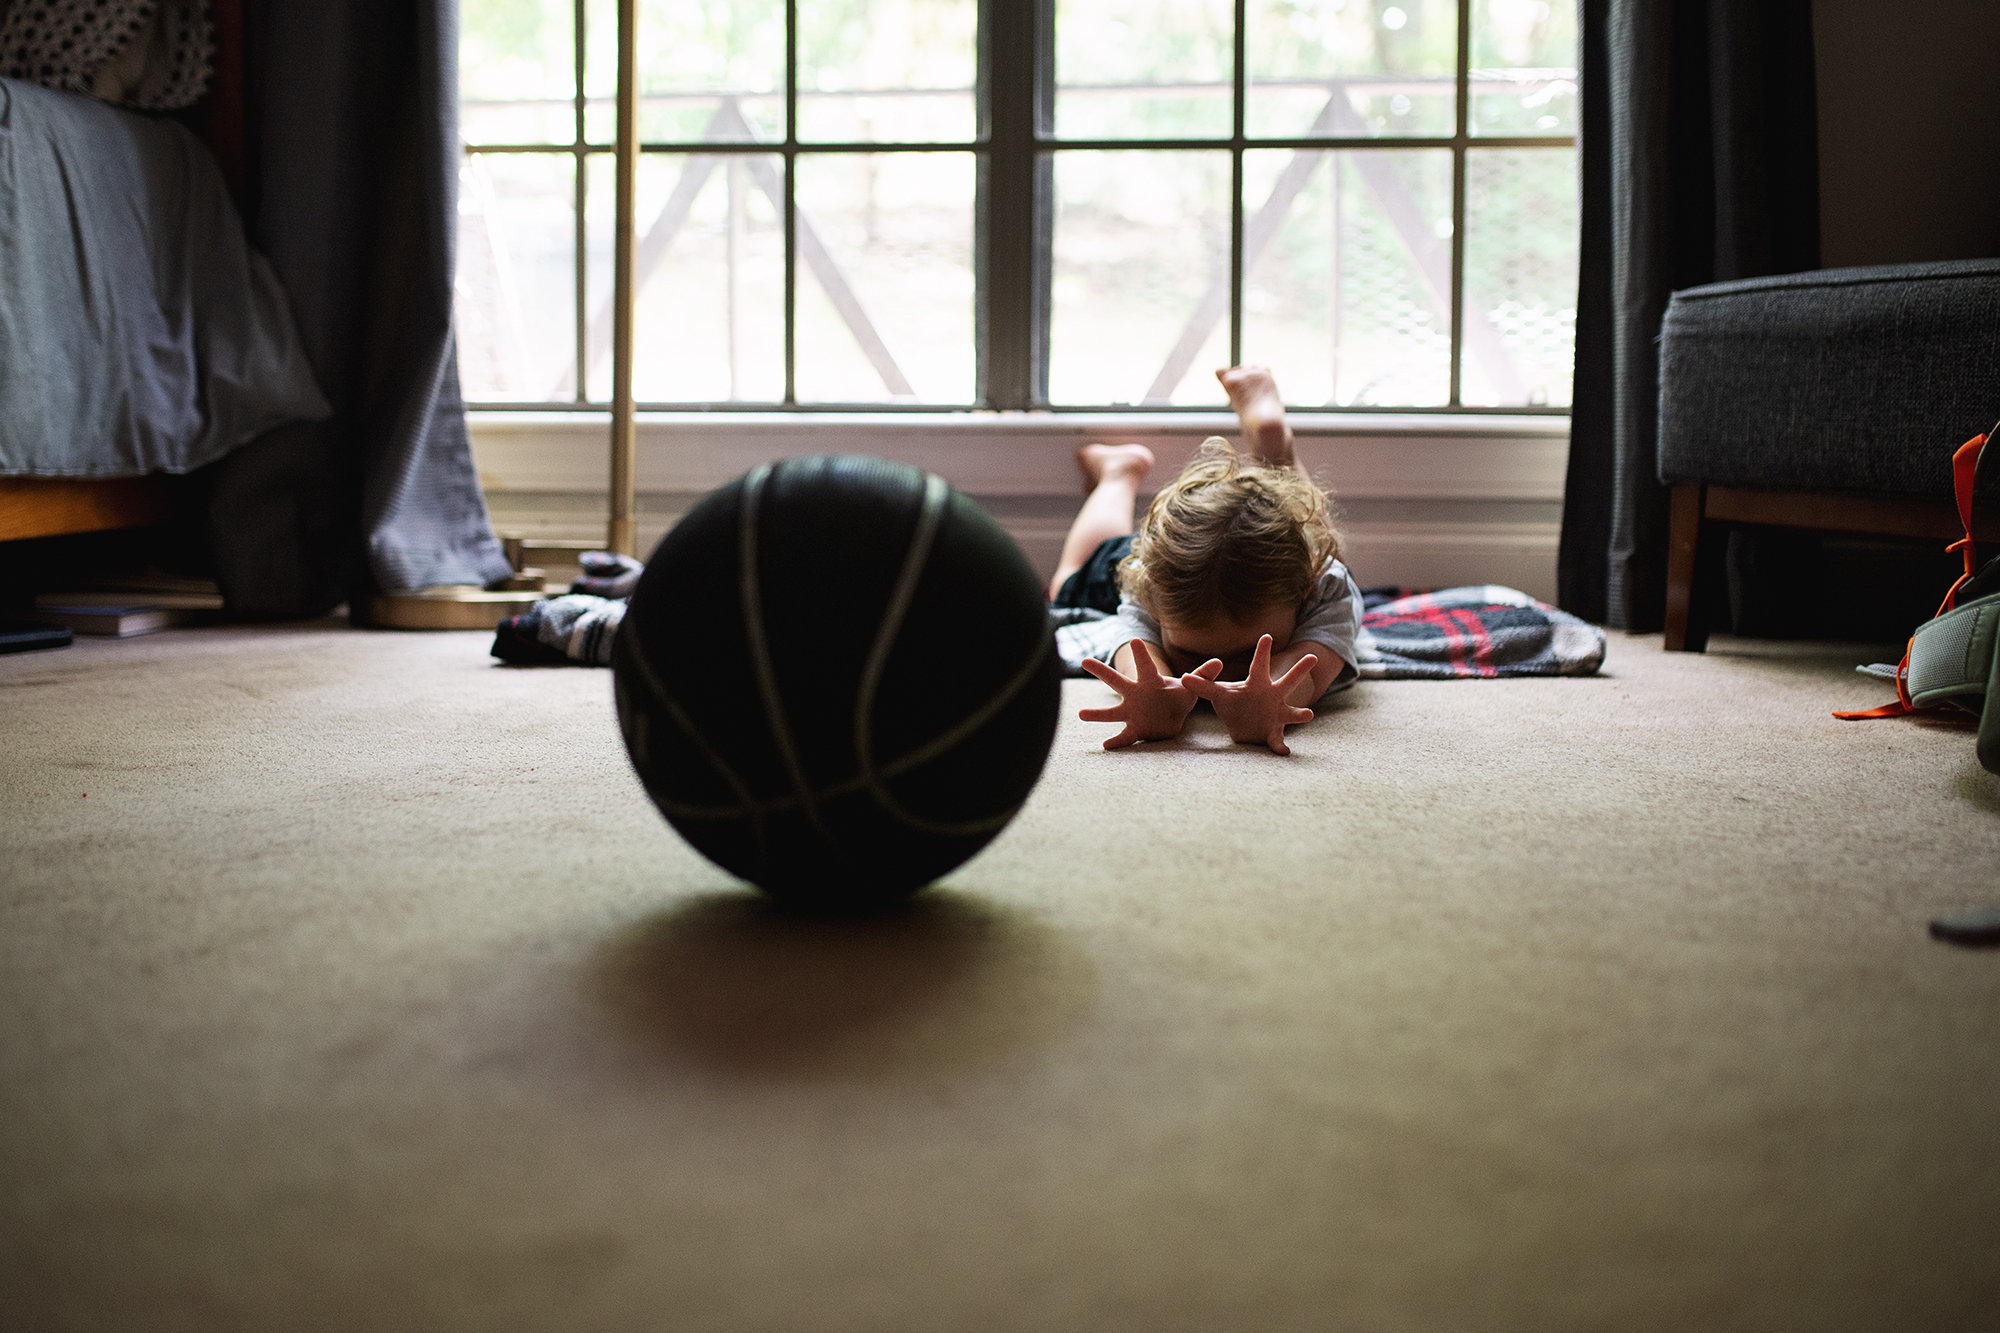 child rolling basket ball along floor - documentary family photography